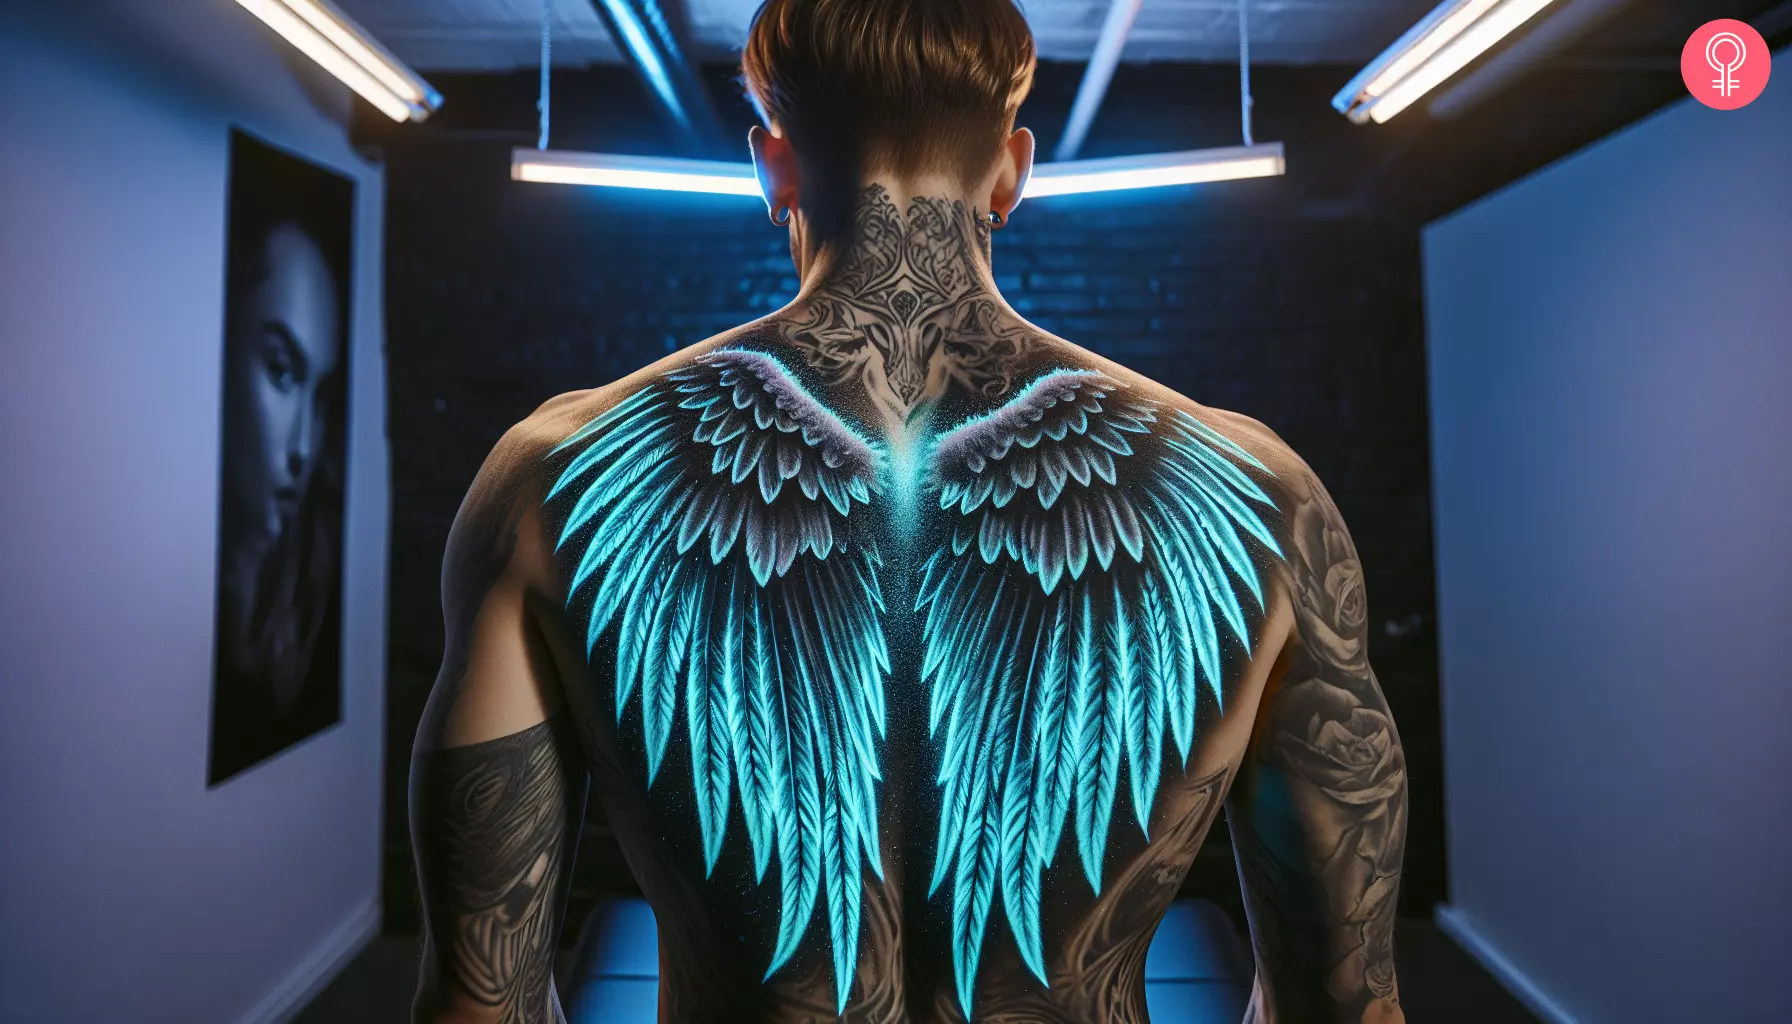 A UV angel wings tattoo on the back of a man